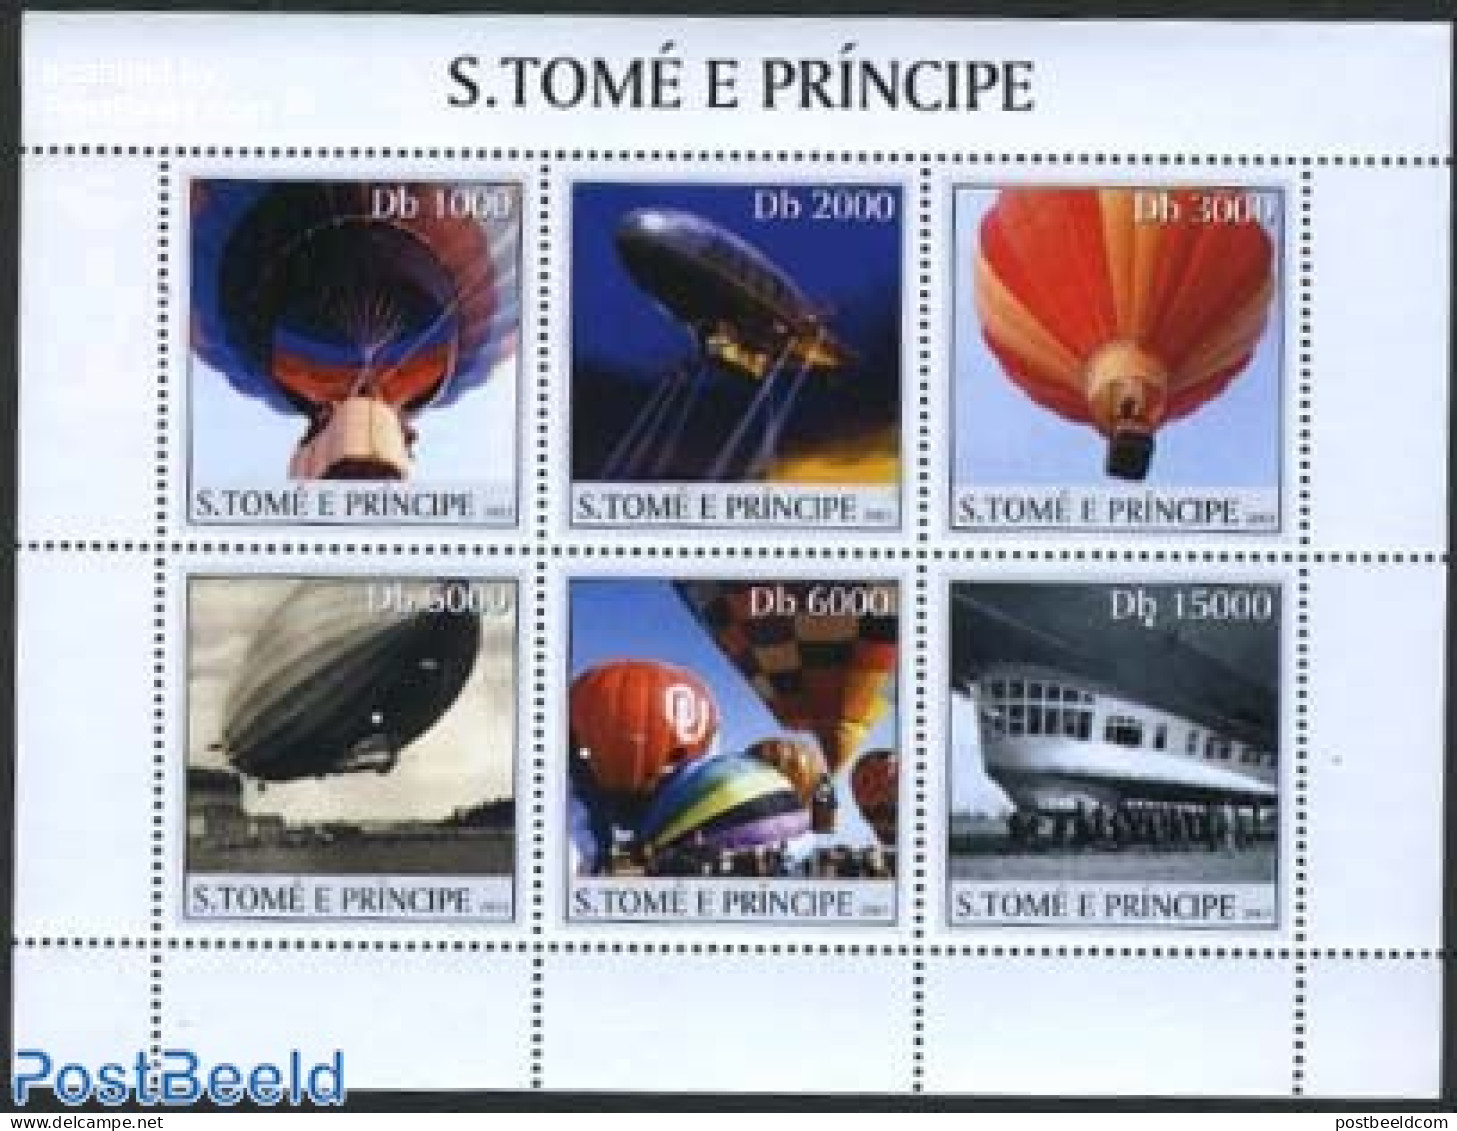 Sao Tome/Principe 2003 Ballons & Zeppelins 6v M/s, Mint NH, Transport - Balloons - Zeppelins - Luchtballons